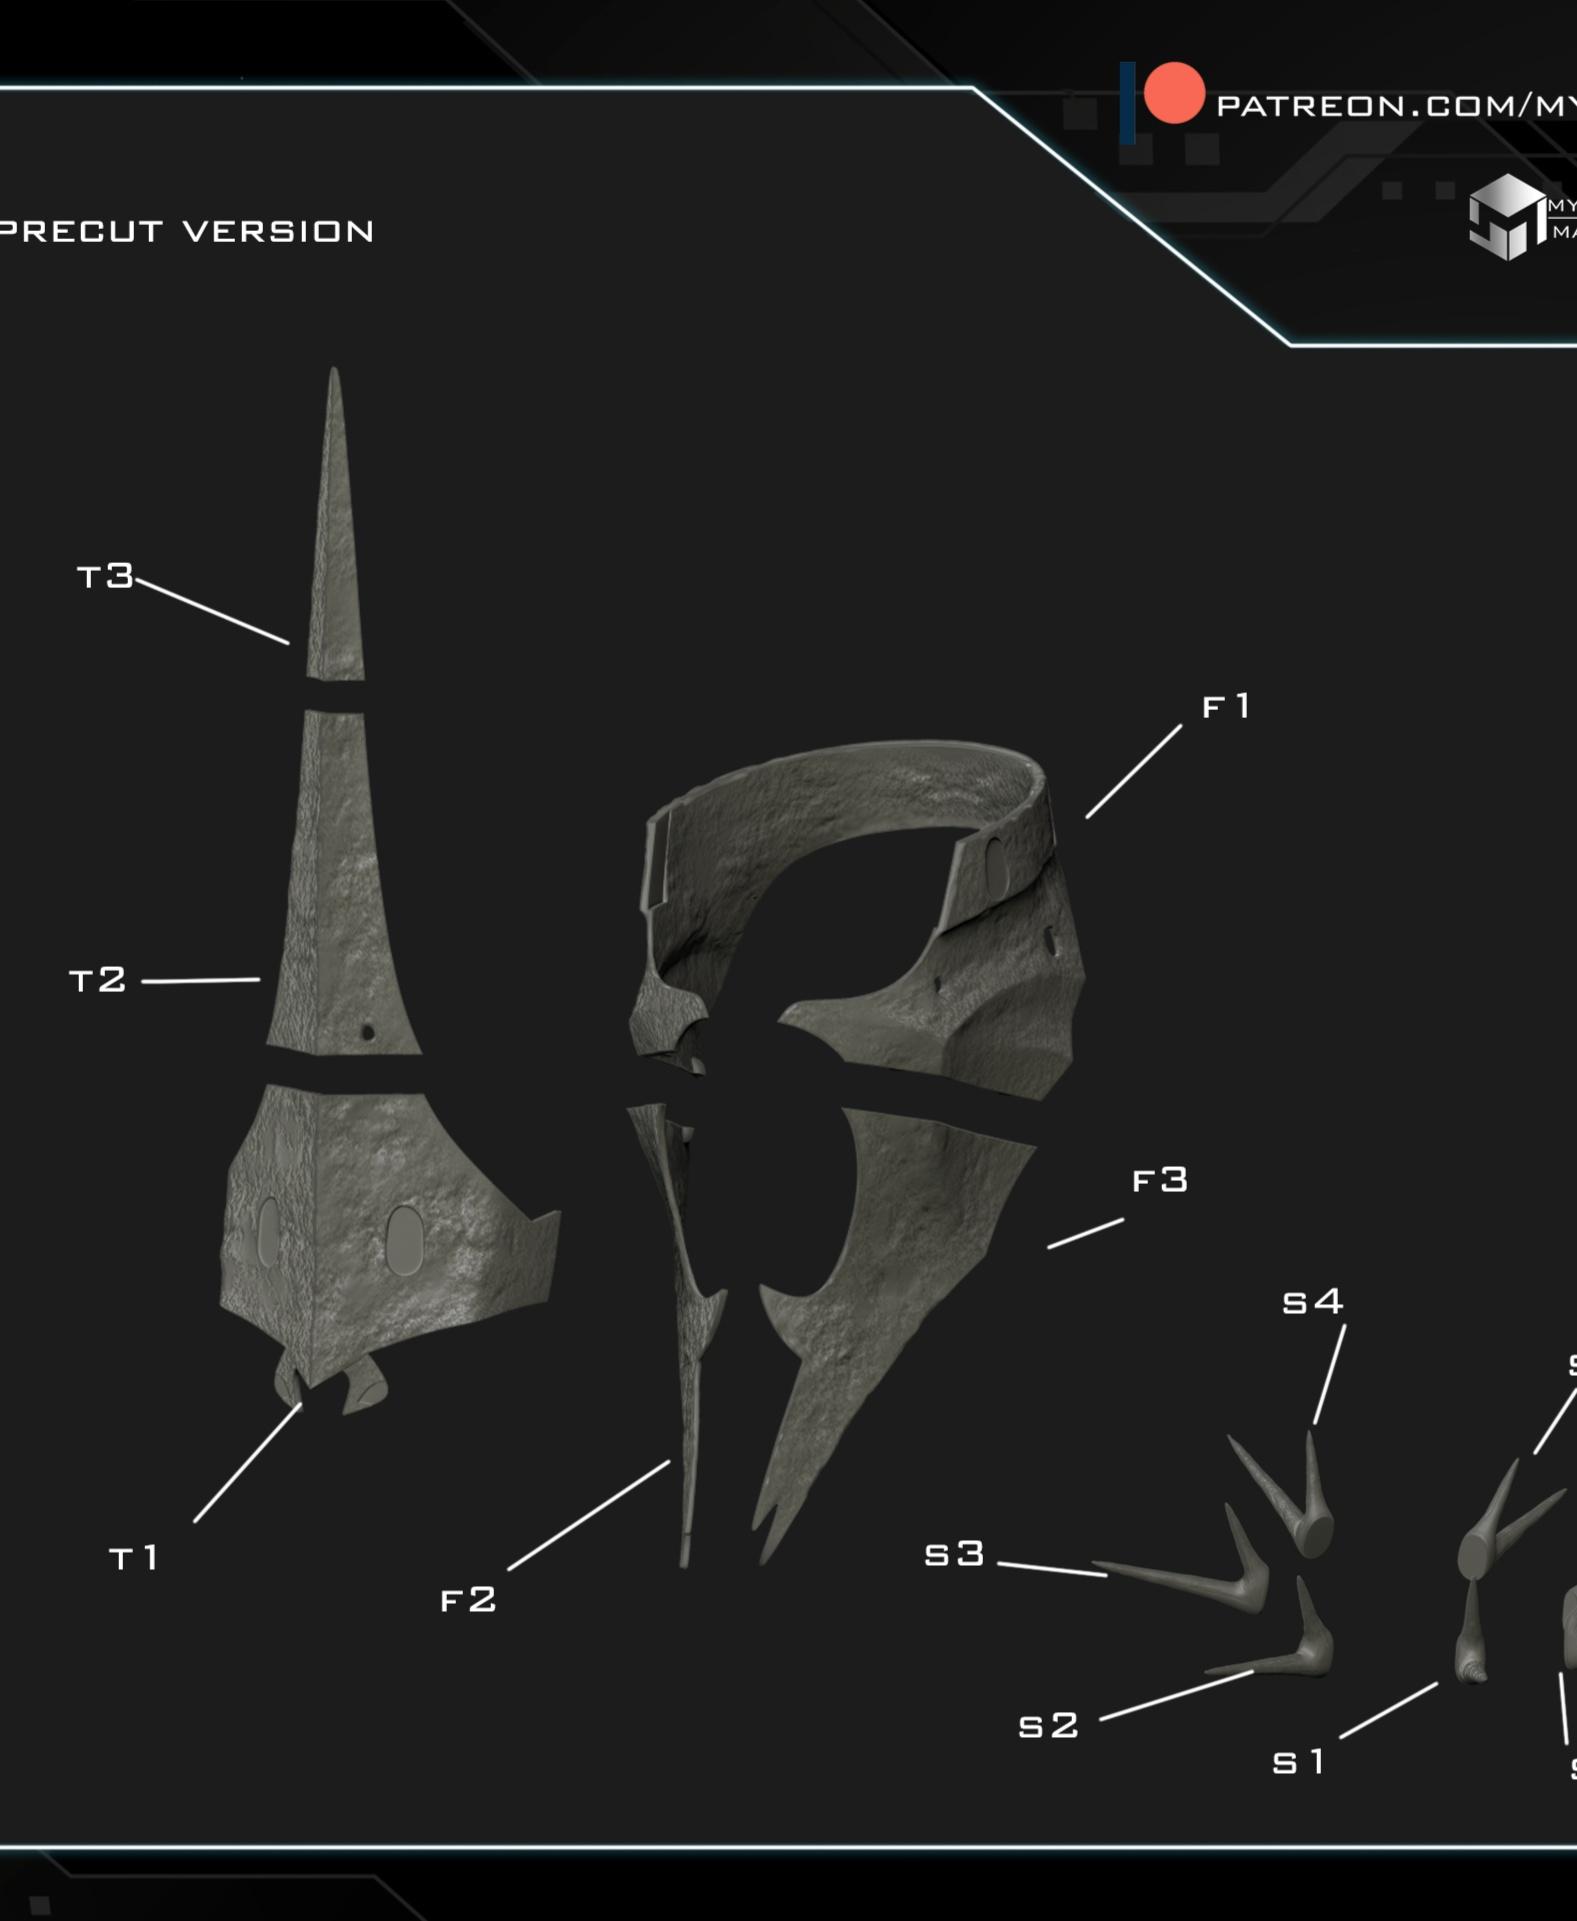 Witch king crown 3d model